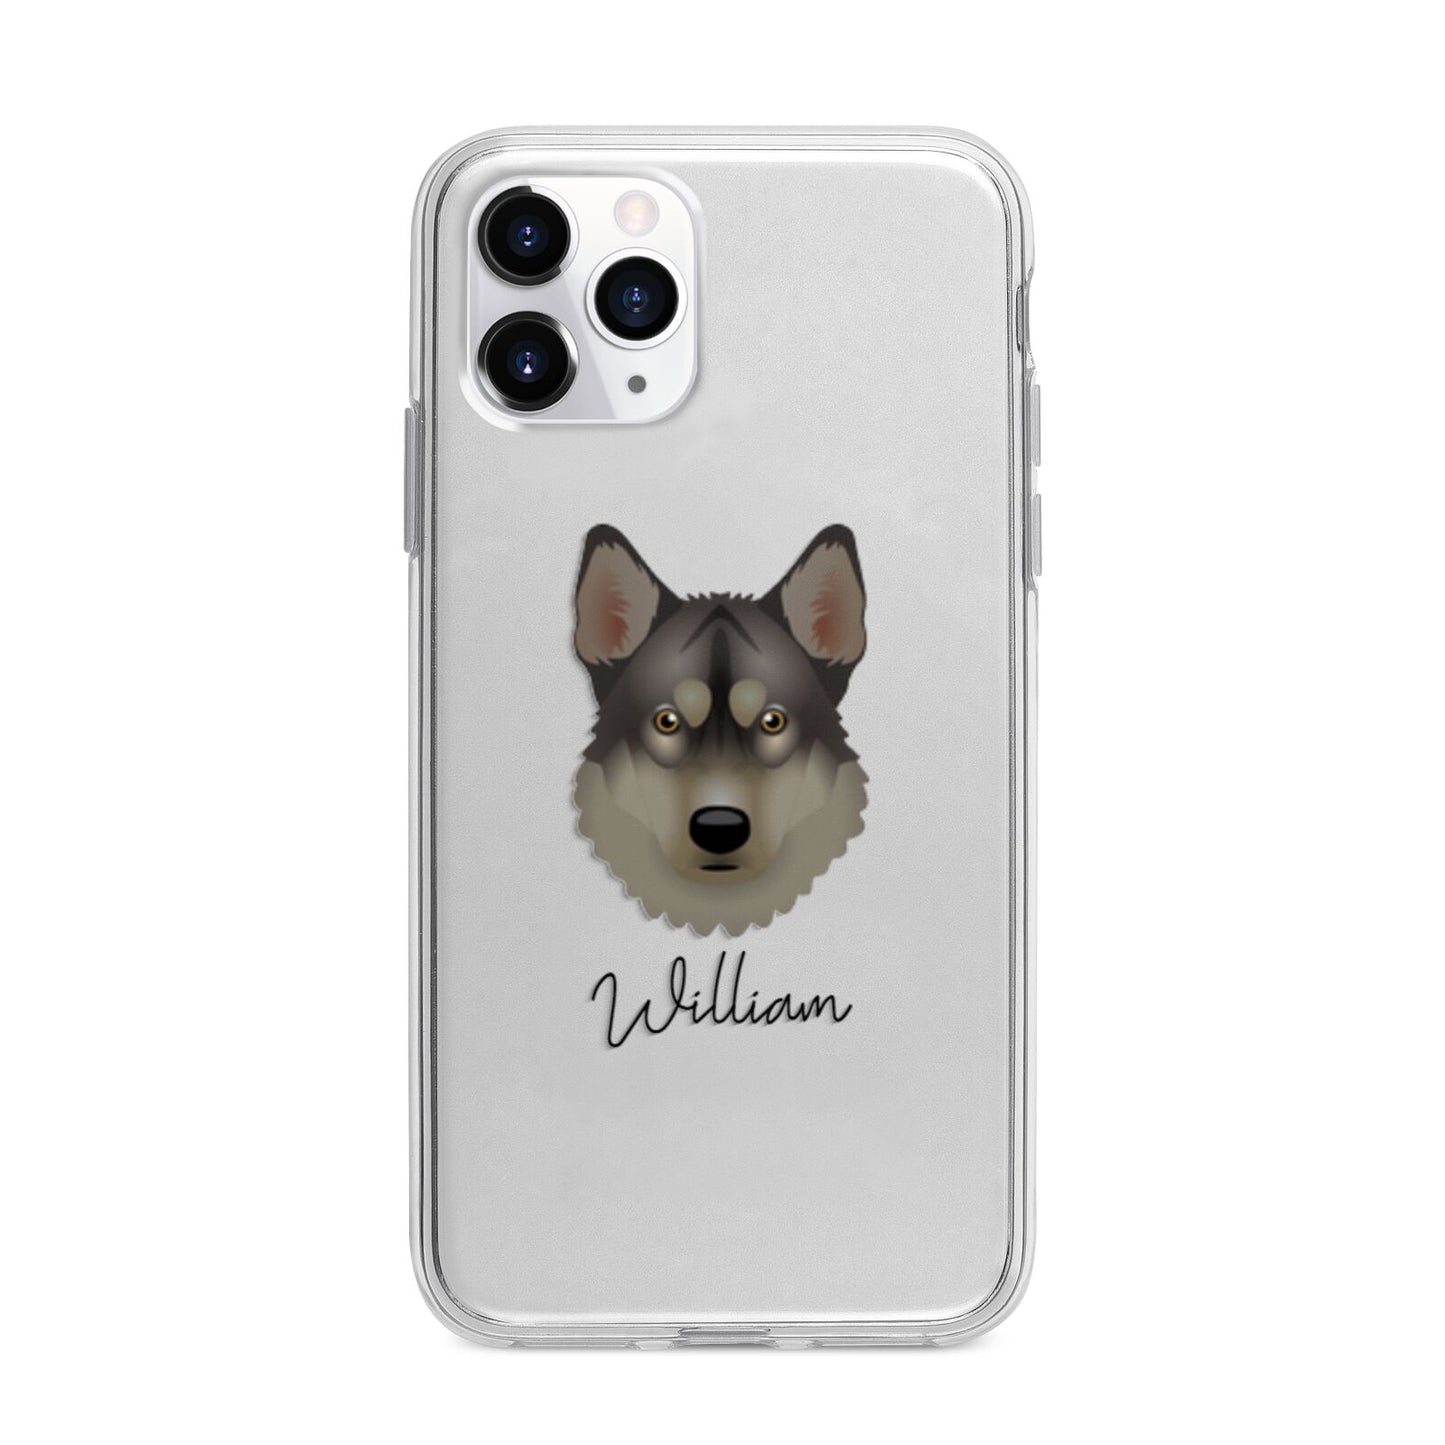 Tamaskan Personalised Apple iPhone 11 Pro Max in Silver with Bumper Case